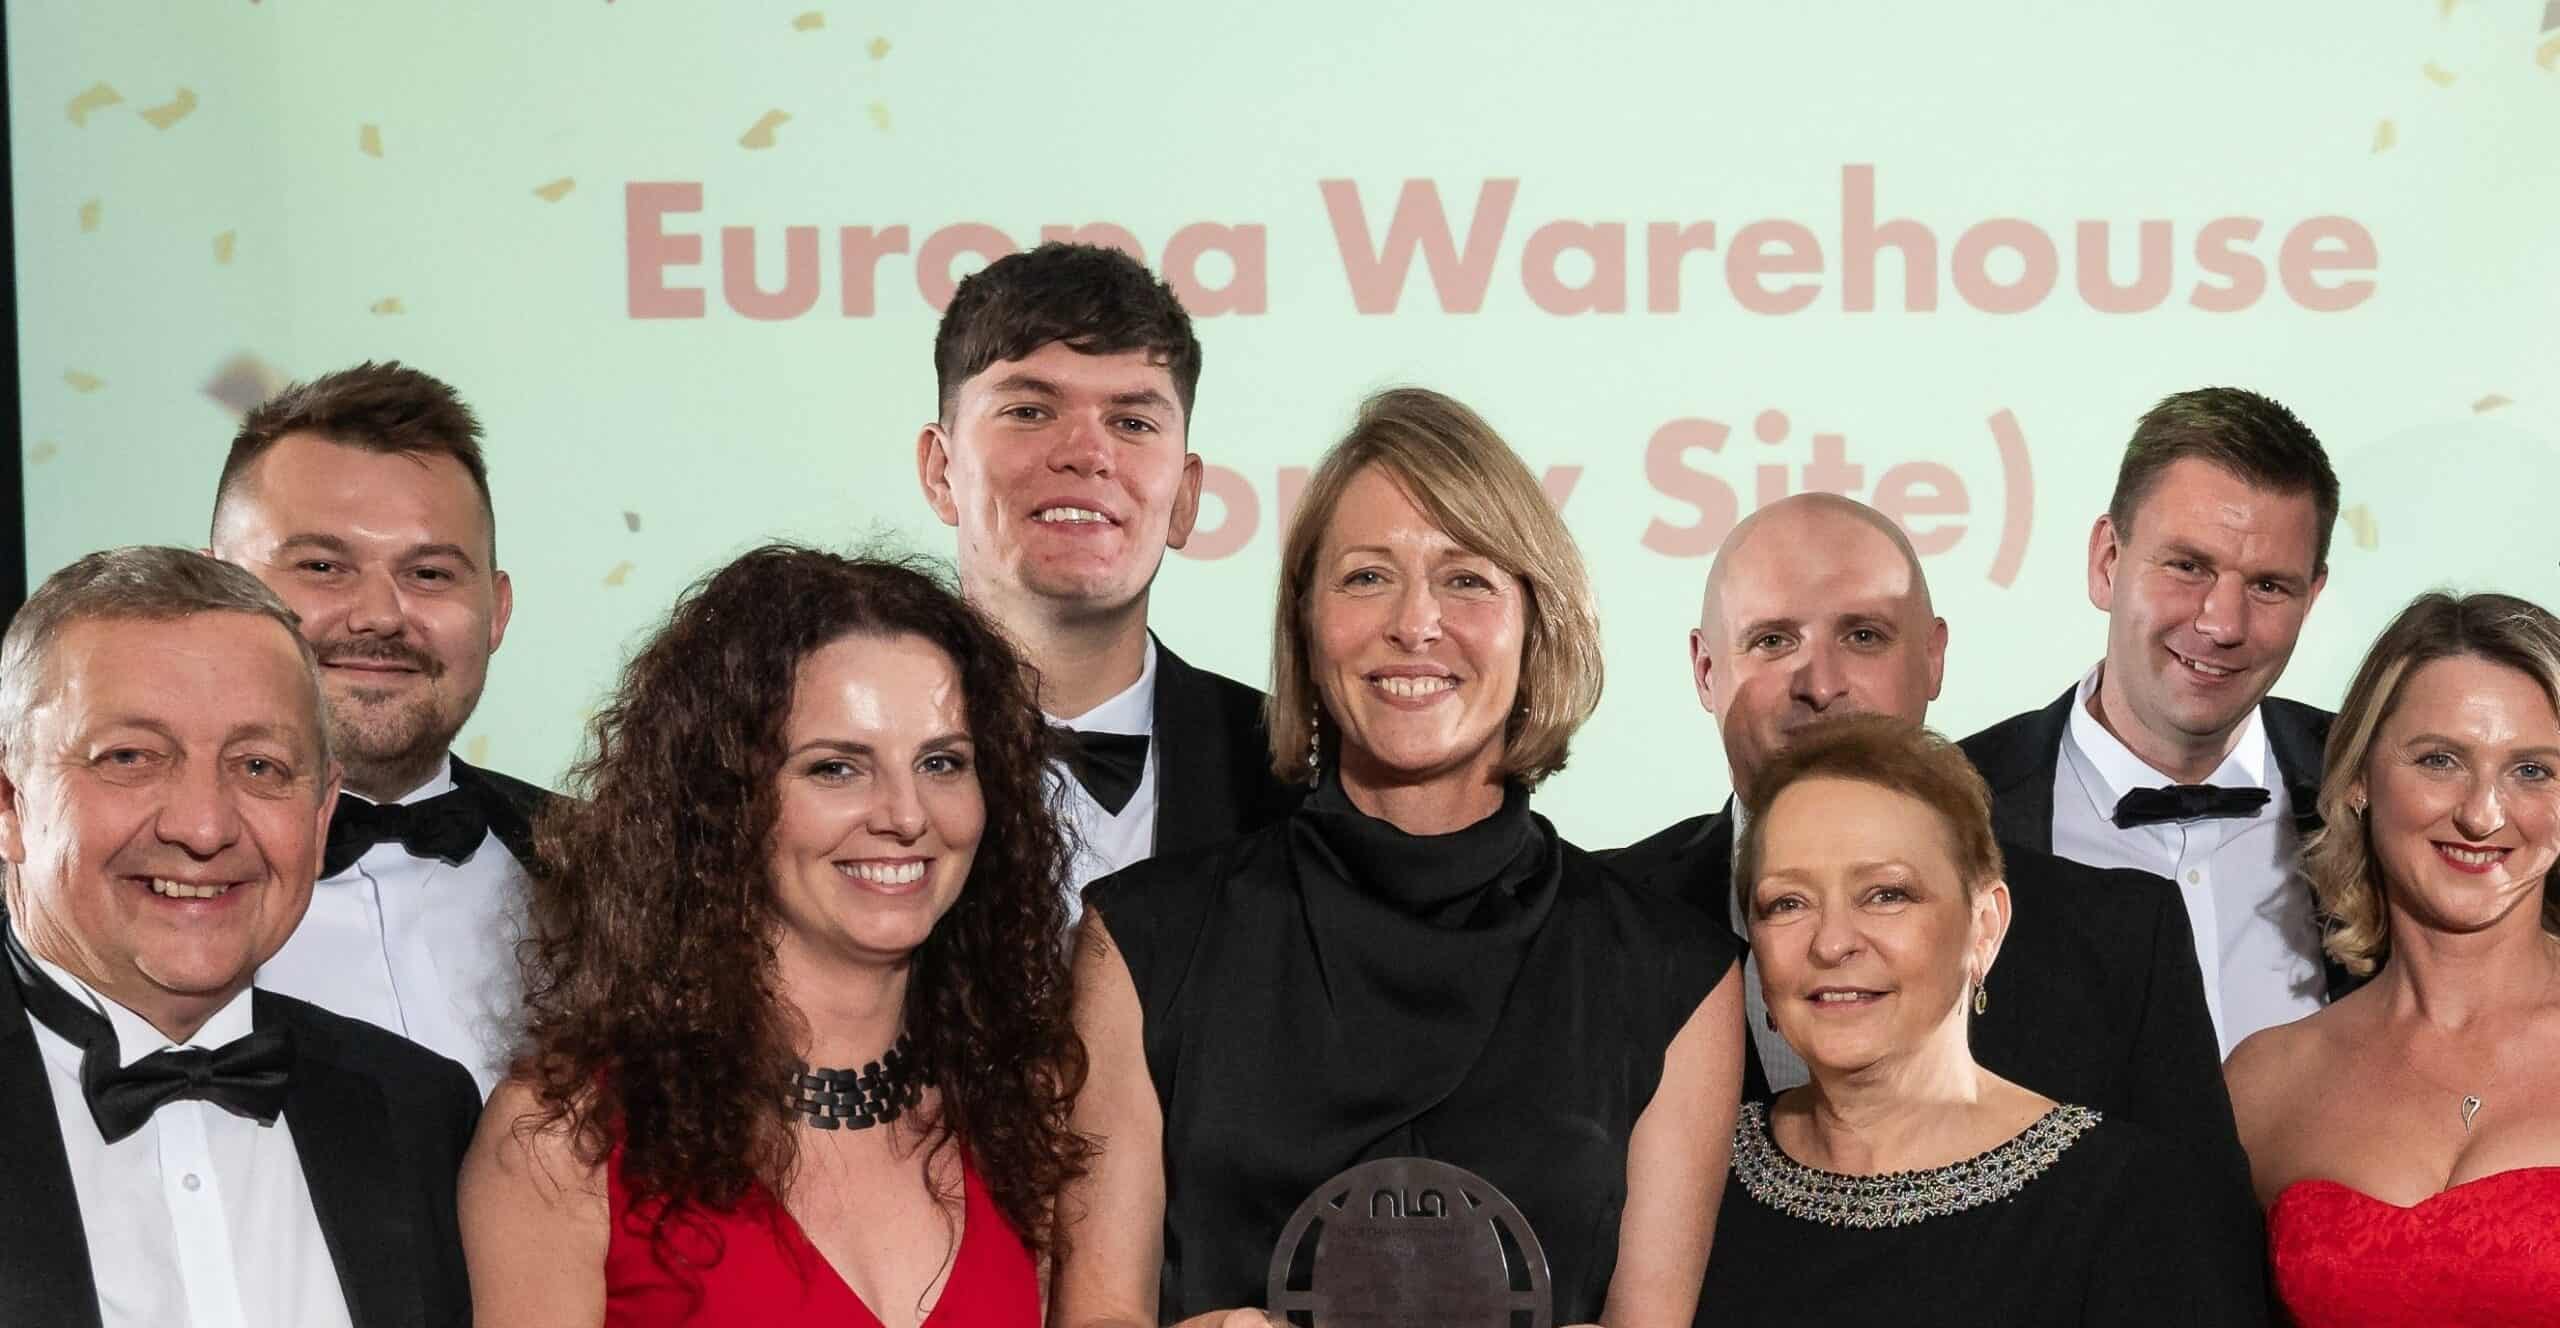 Europa Warehouse team in Corby